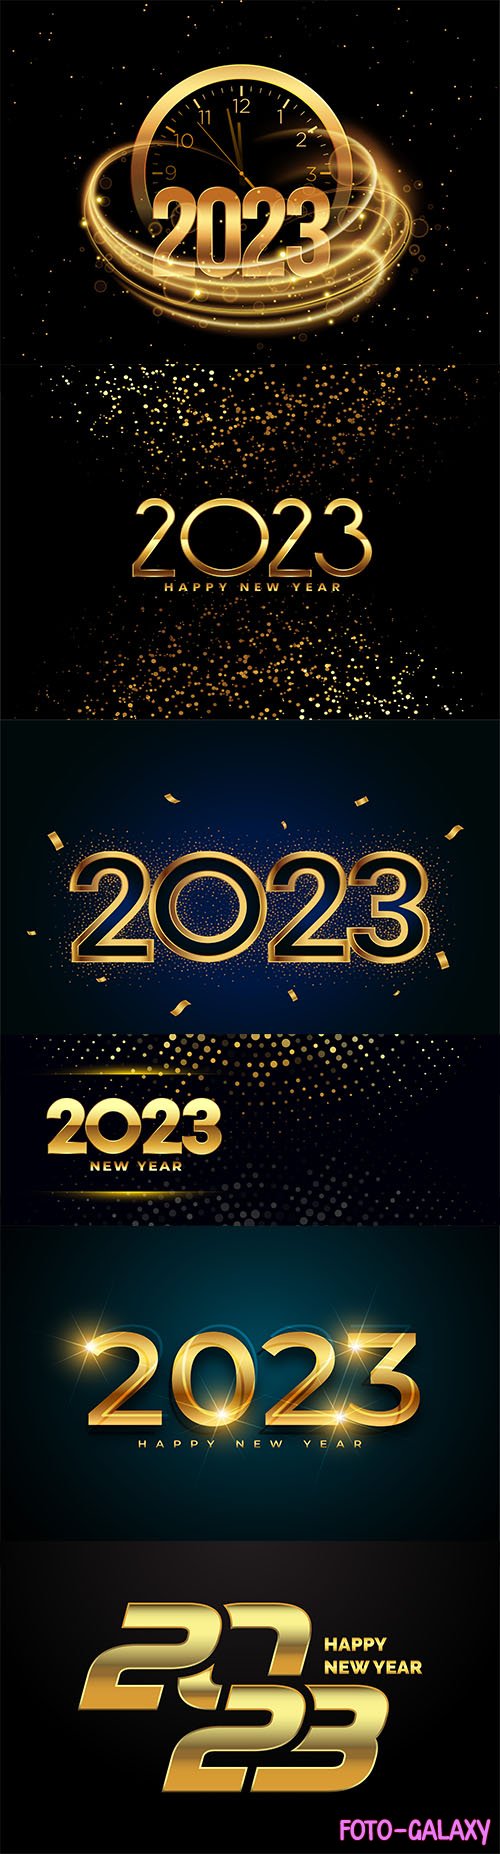 2023 new year wishes vector card with golden confetti and sparkle